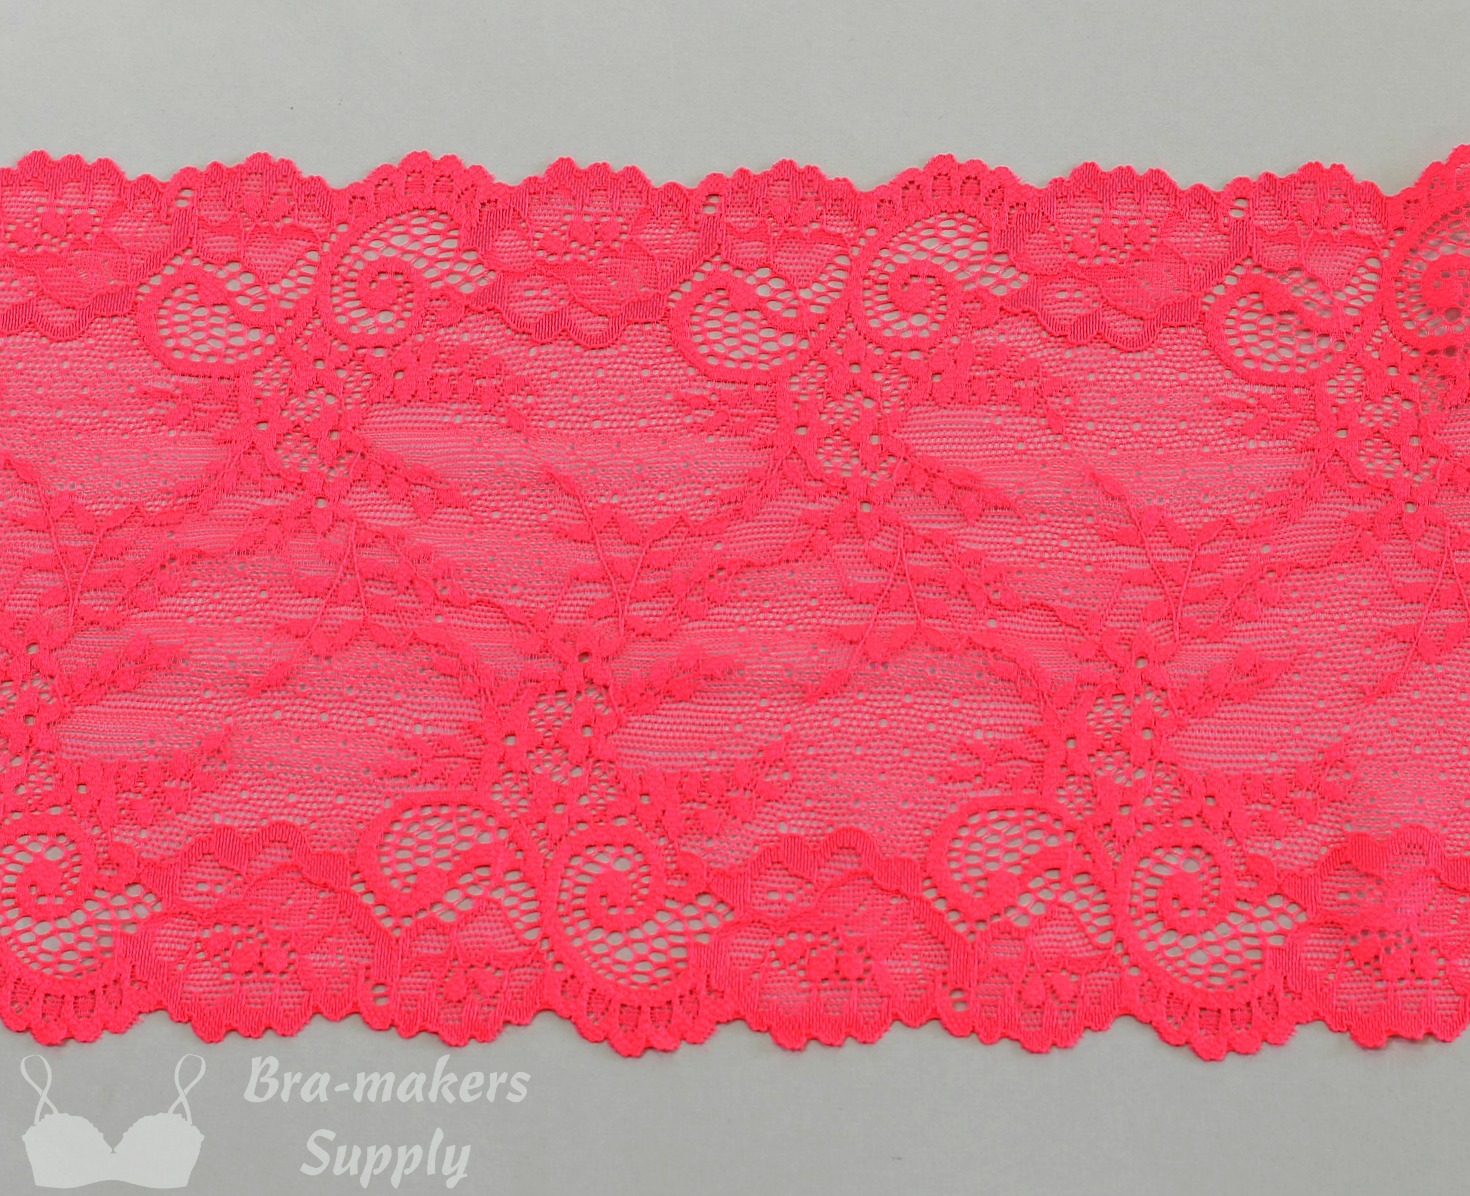 Seven Inch Neon Coral Floral Stretch Lace - Bra-makers Supply